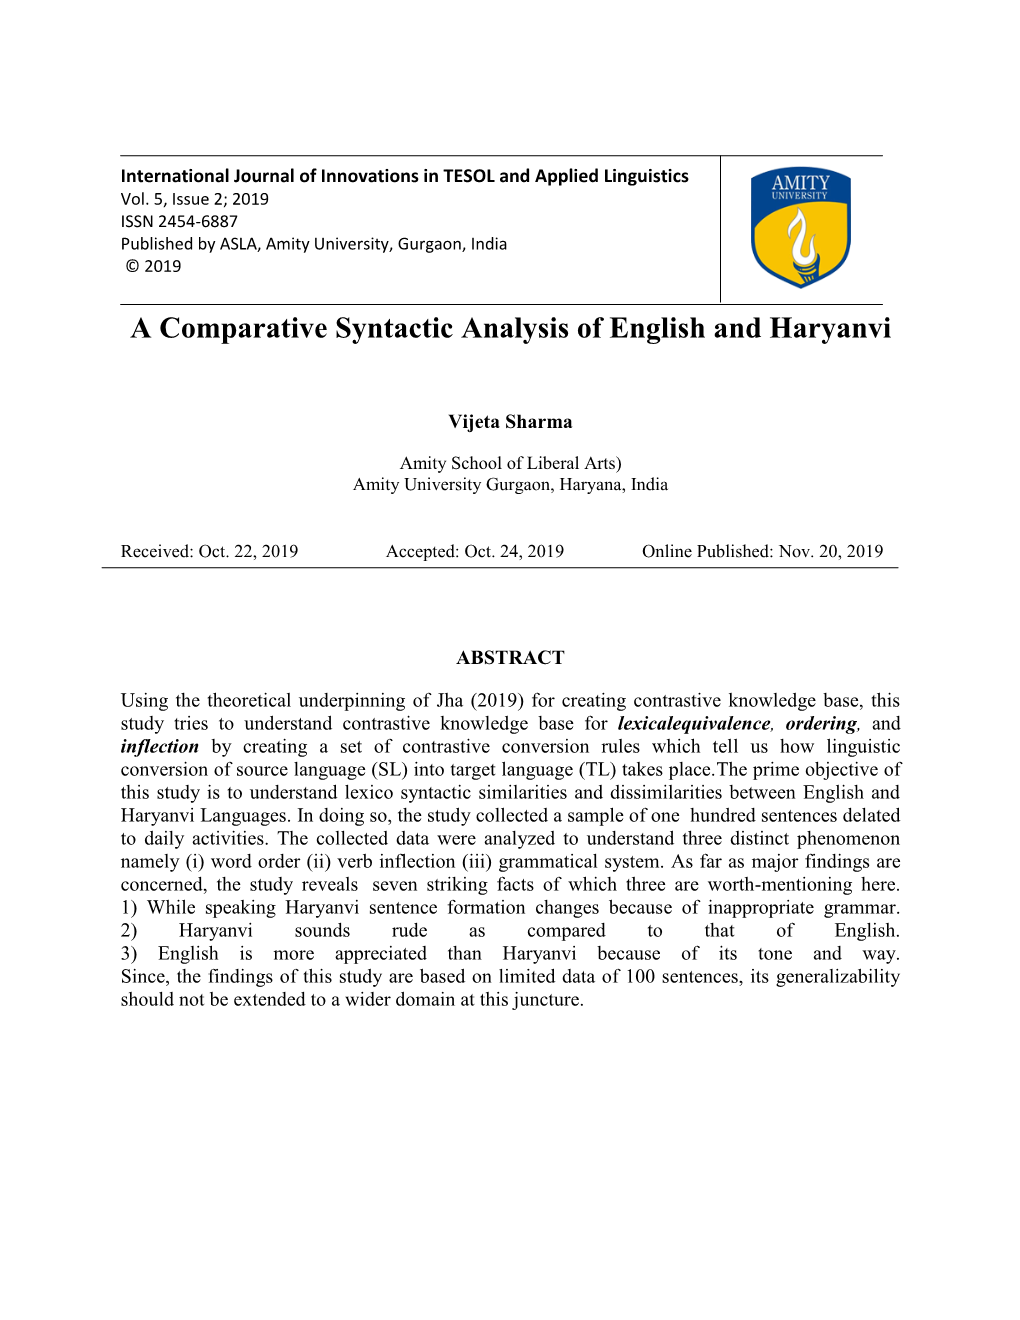 A Comparative Syntactic Analysis of English and Haryanvi